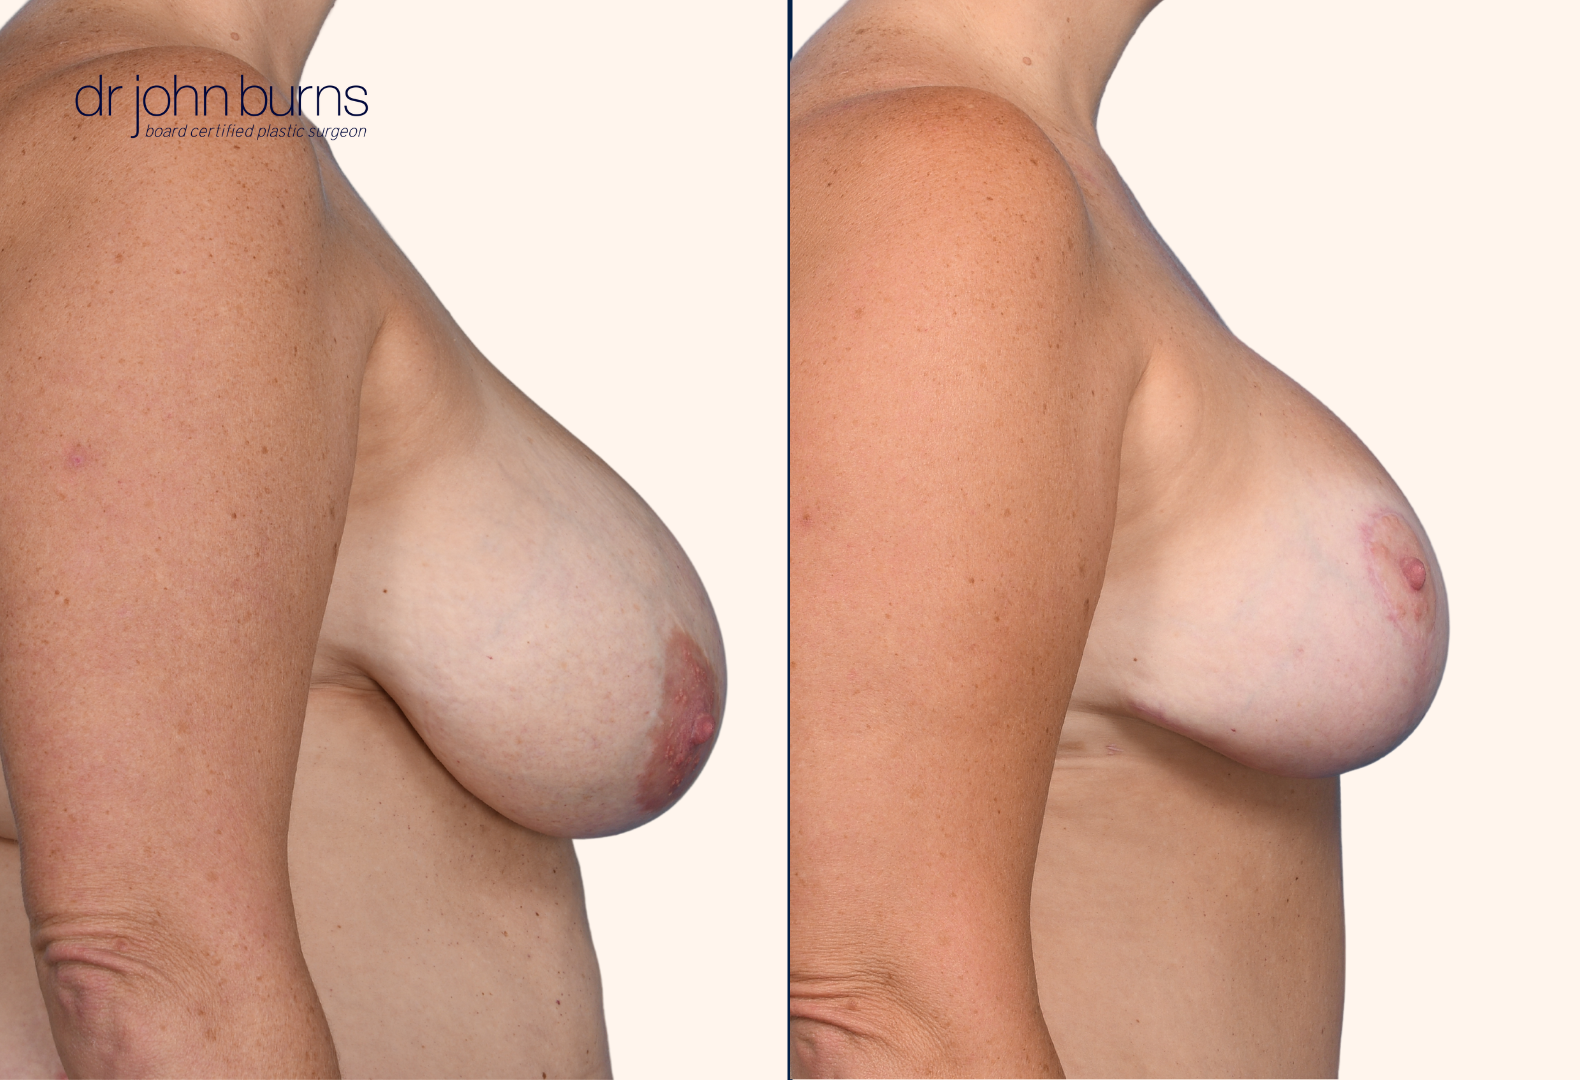 Breast reduction before and after by Dr. John Burns